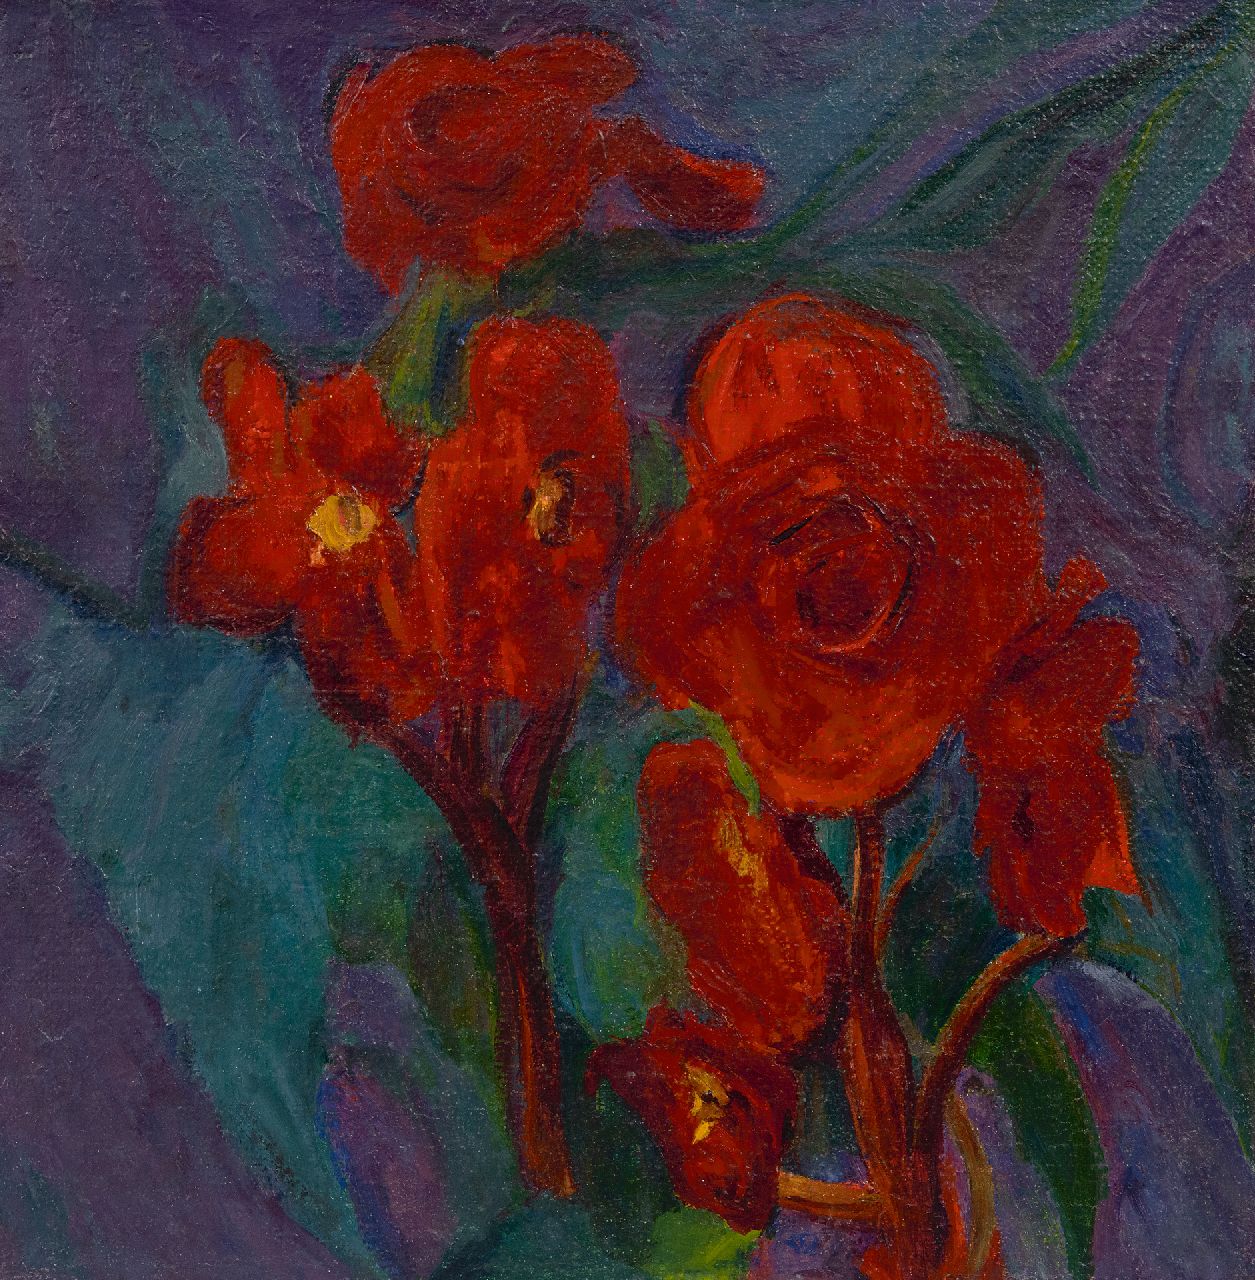 Dijkstra J.  | Johannes 'Johan' Dijkstra | Paintings offered for sale | Red flowers, oil on canvas 36.0 x 35.8 cm, signed on the stretcher